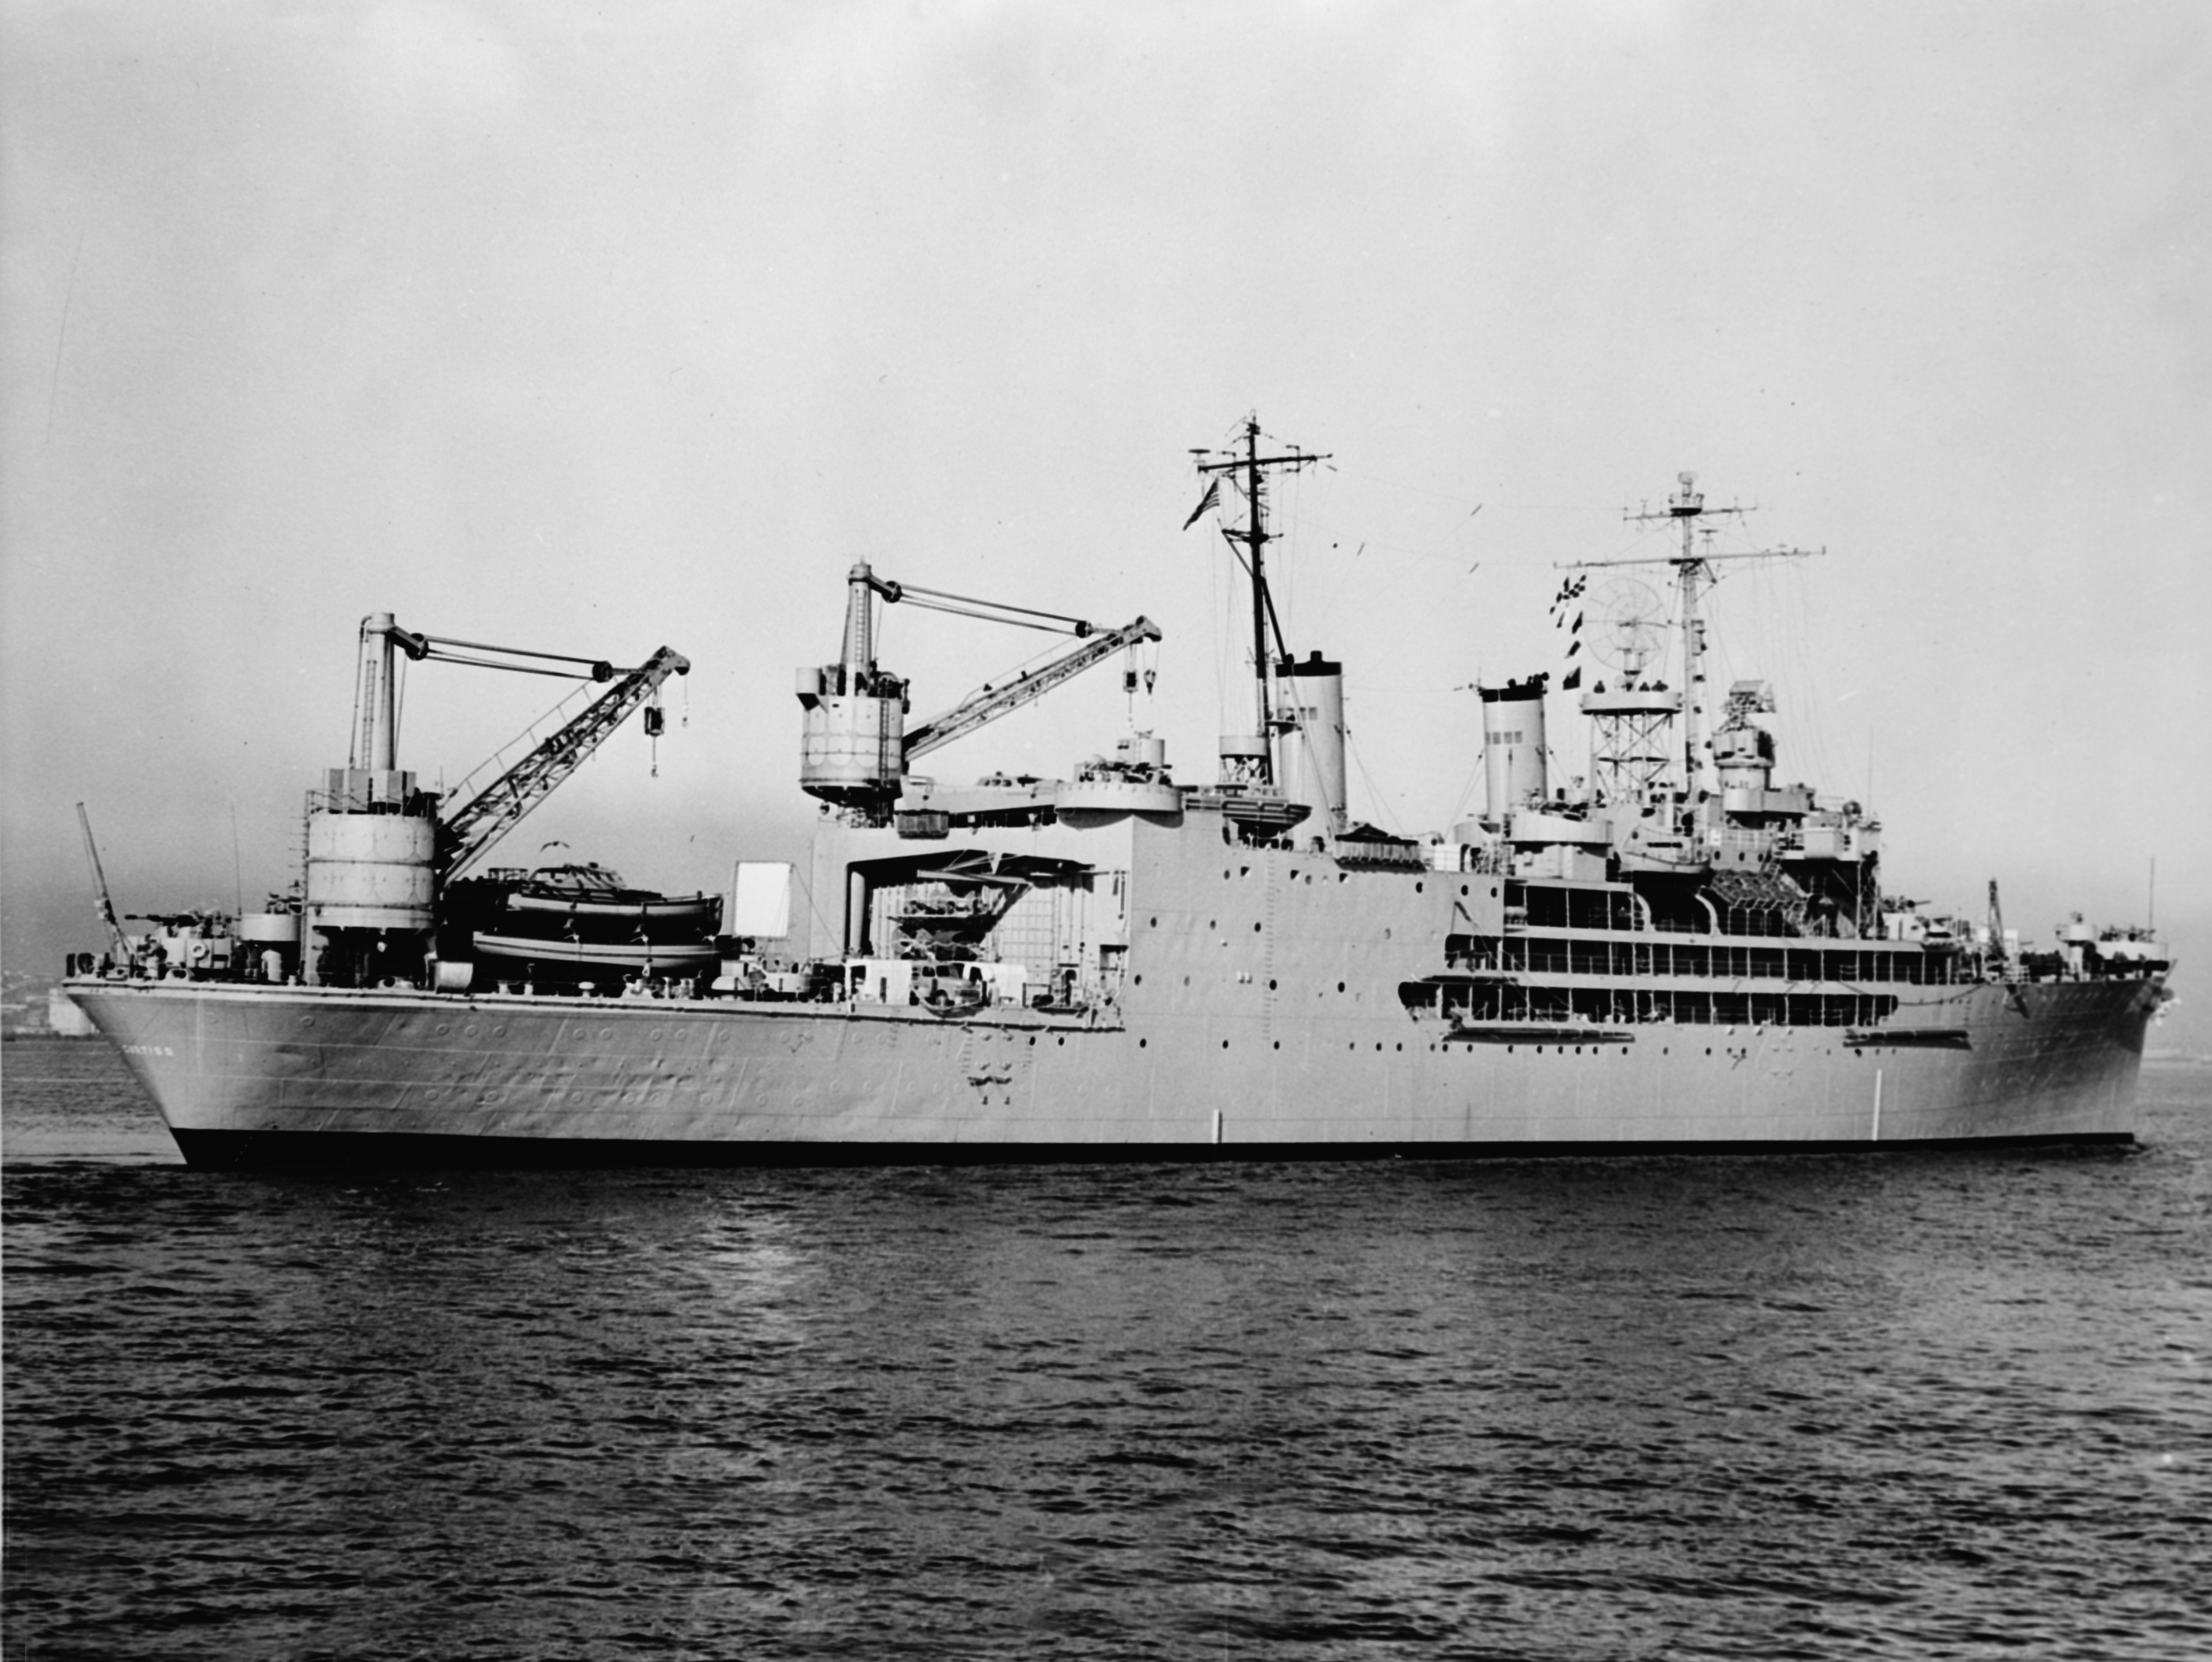 File:Aft view of USS Curtiss (AV-4) off San Francisco on 2 J